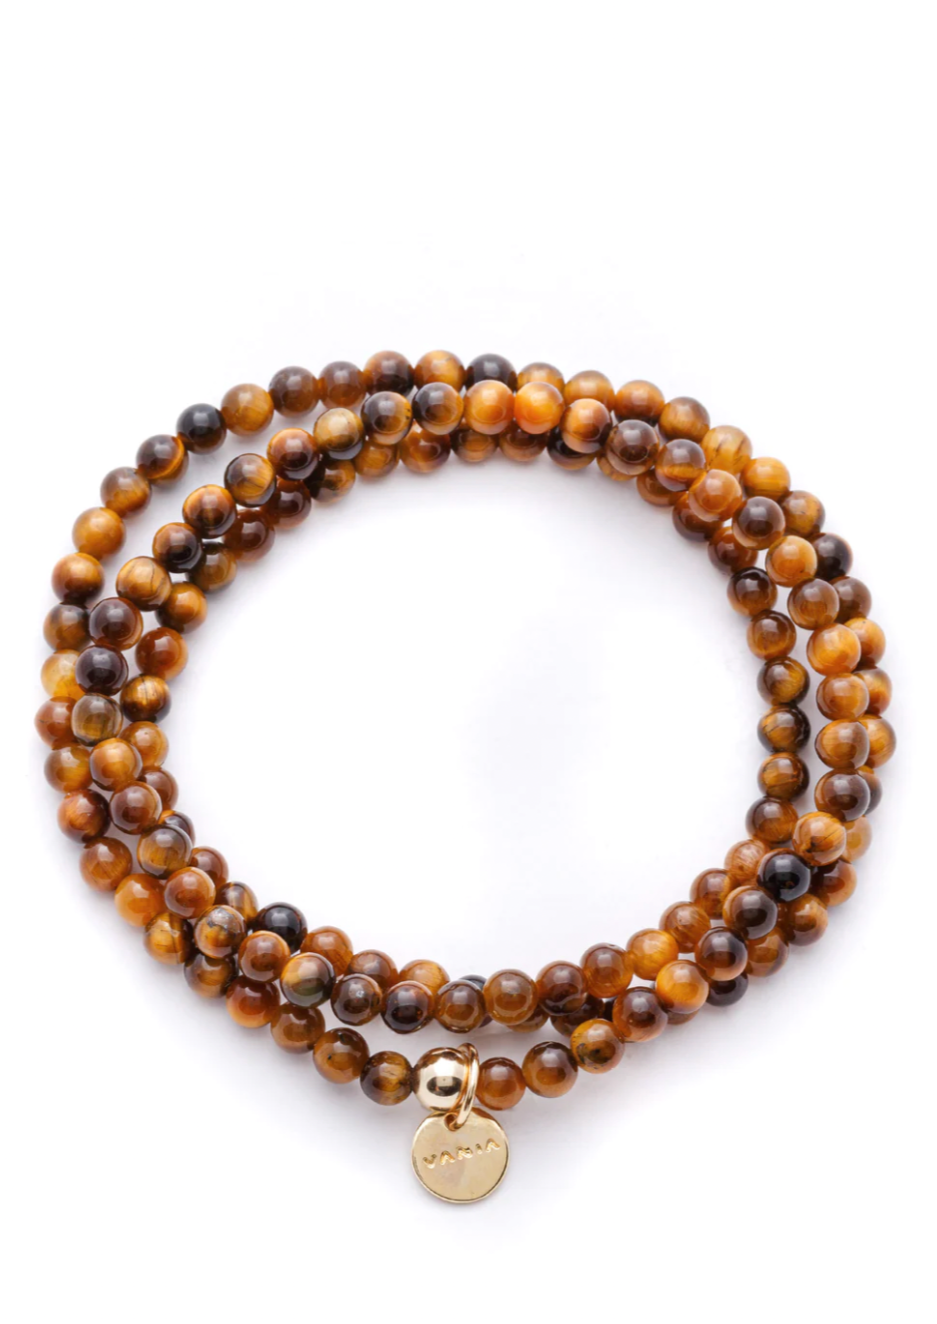 Amuleto Tiger's Eye Wrap Bracelet - Small bead Strung by hand with Tiger’s Eye and love. This gemstone is highly regarded as a stone of good luck. Throughout history, Tiger’s eye was also said to be a protective stone and was worn by Roman soldiers as an amulet. Said to be the stone that heals issues of self-worth, self-criticism and blocked creativity, by wearing this piece be reminded of your abilities and talents.